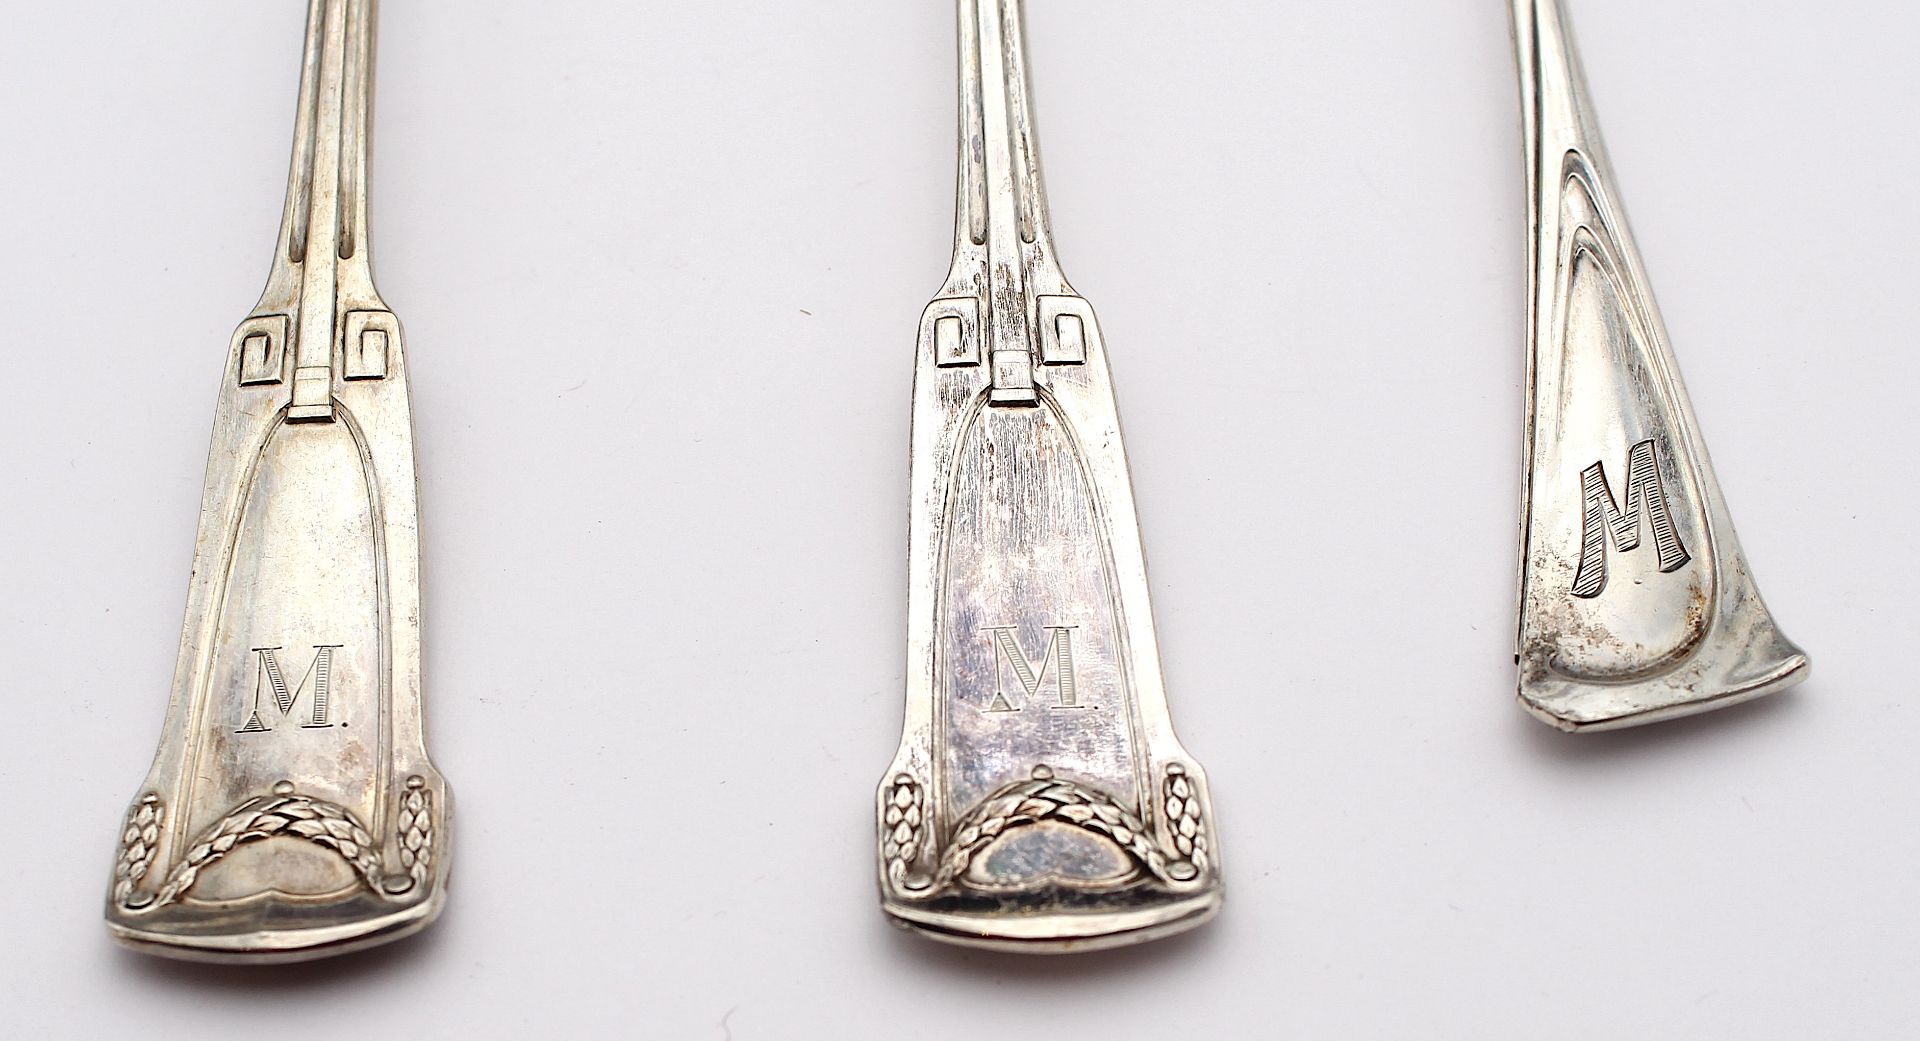 Presentation cutlery in 800 silver around 1900 - Image 2 of 6